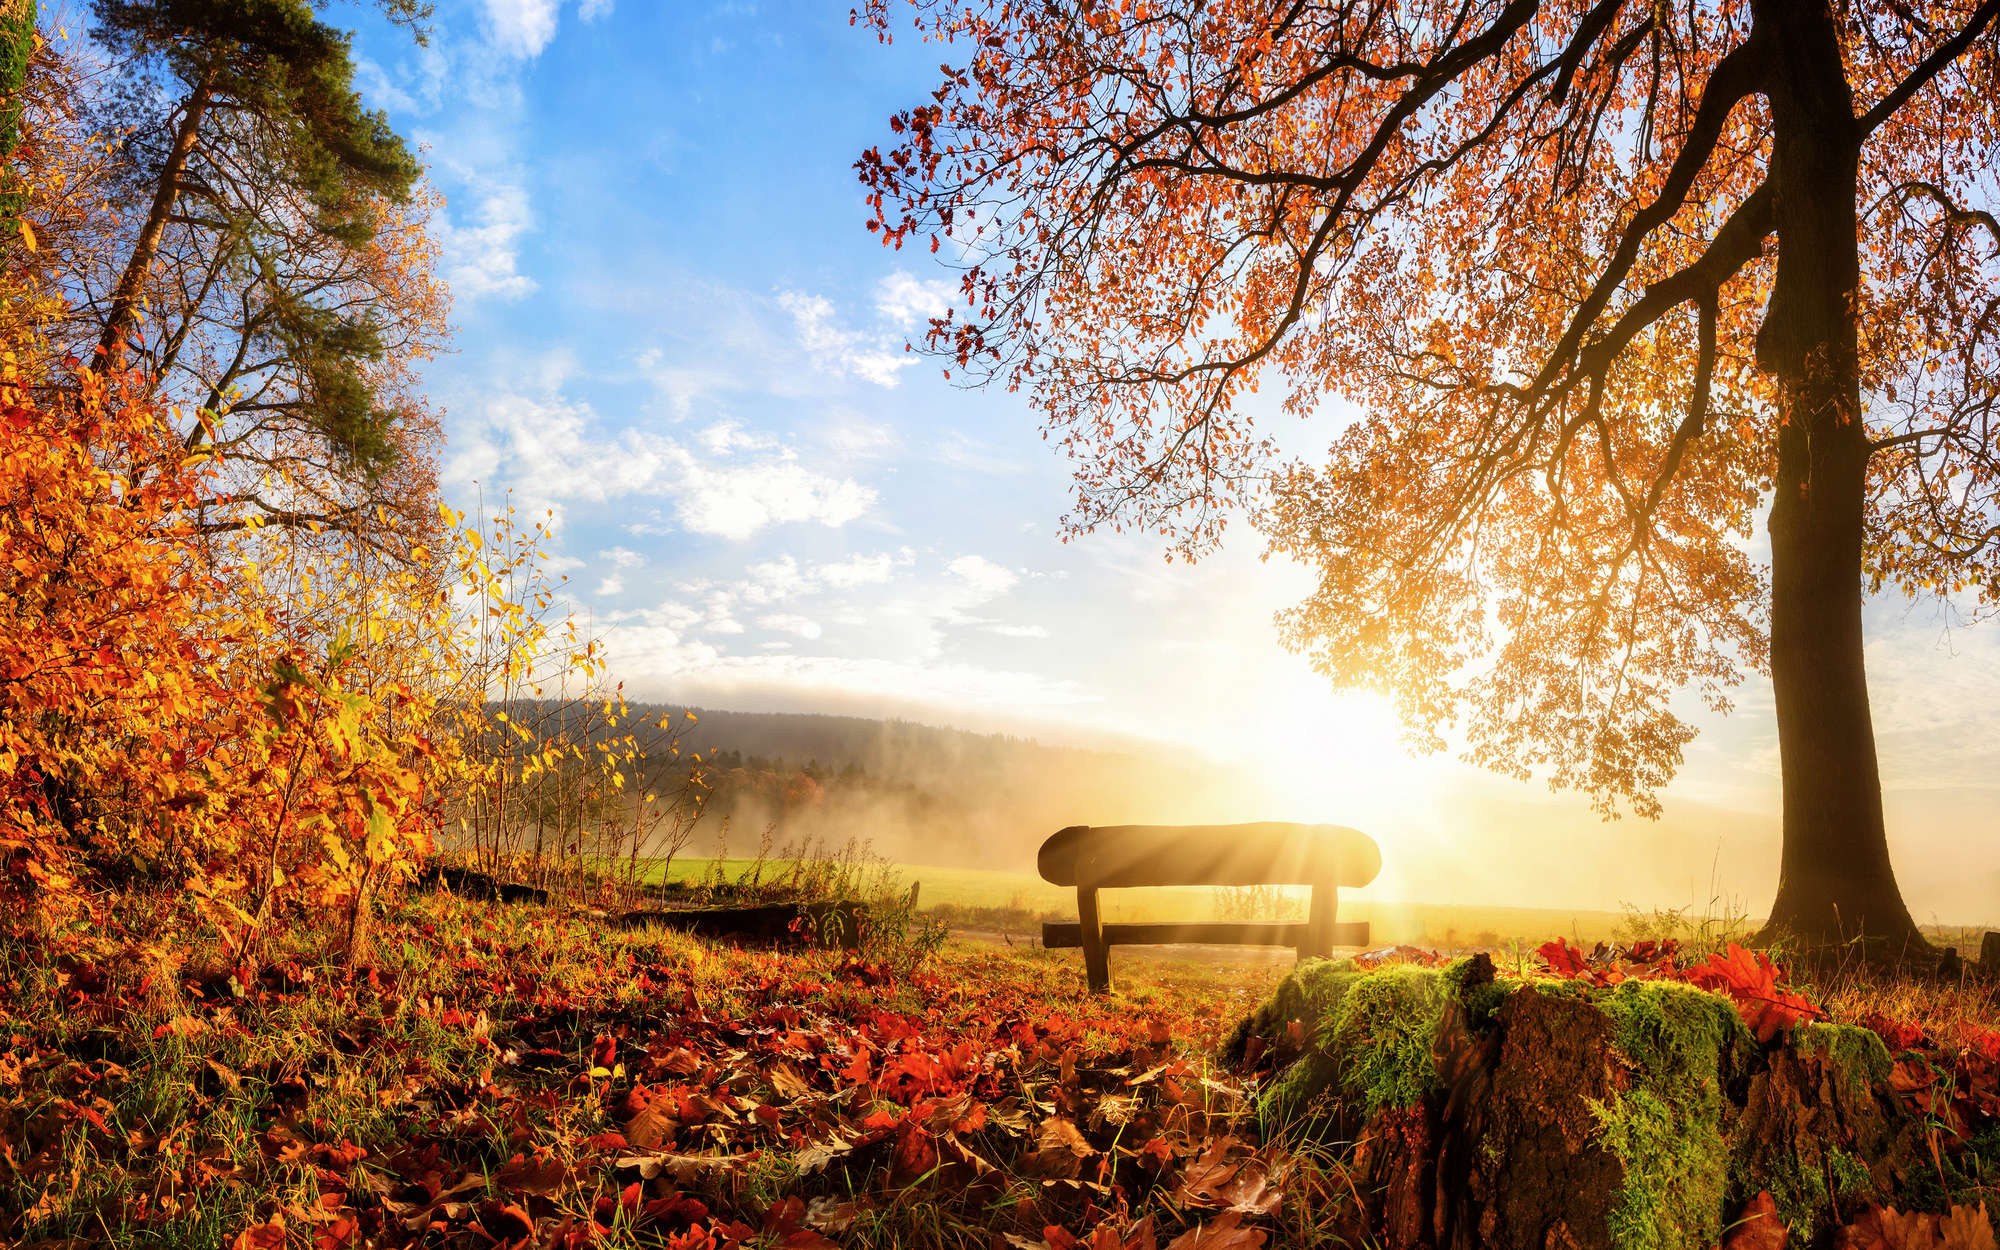             Photo wallpaper Bench in the forest on an autumn morning - Matt smooth non-woven
        